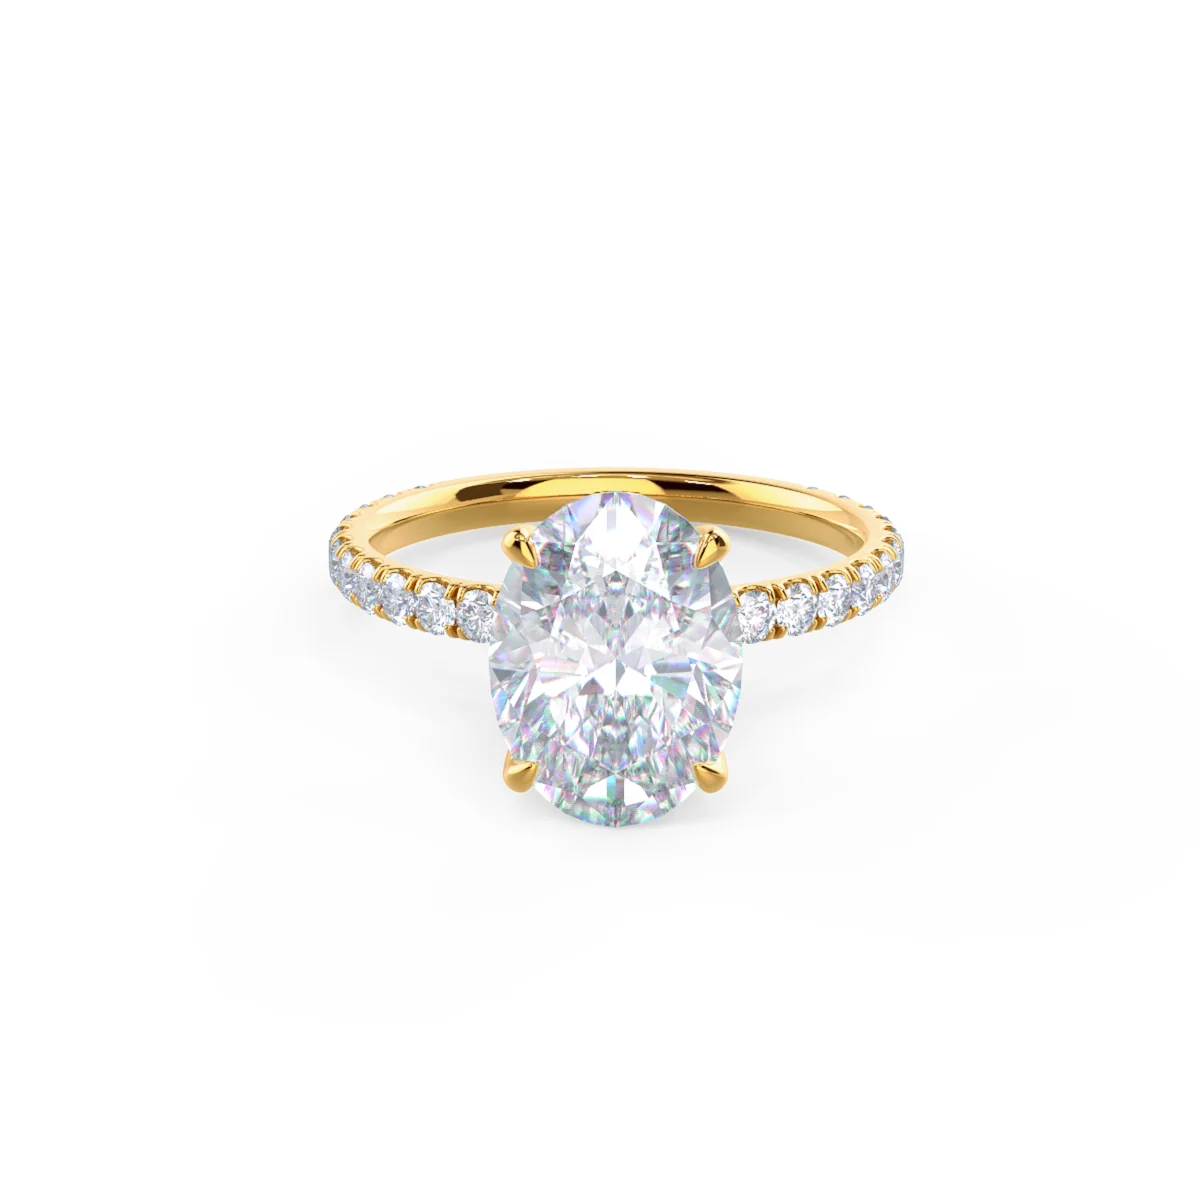 Oval Classic Four Prong Pavé Diamond Engagement Ring